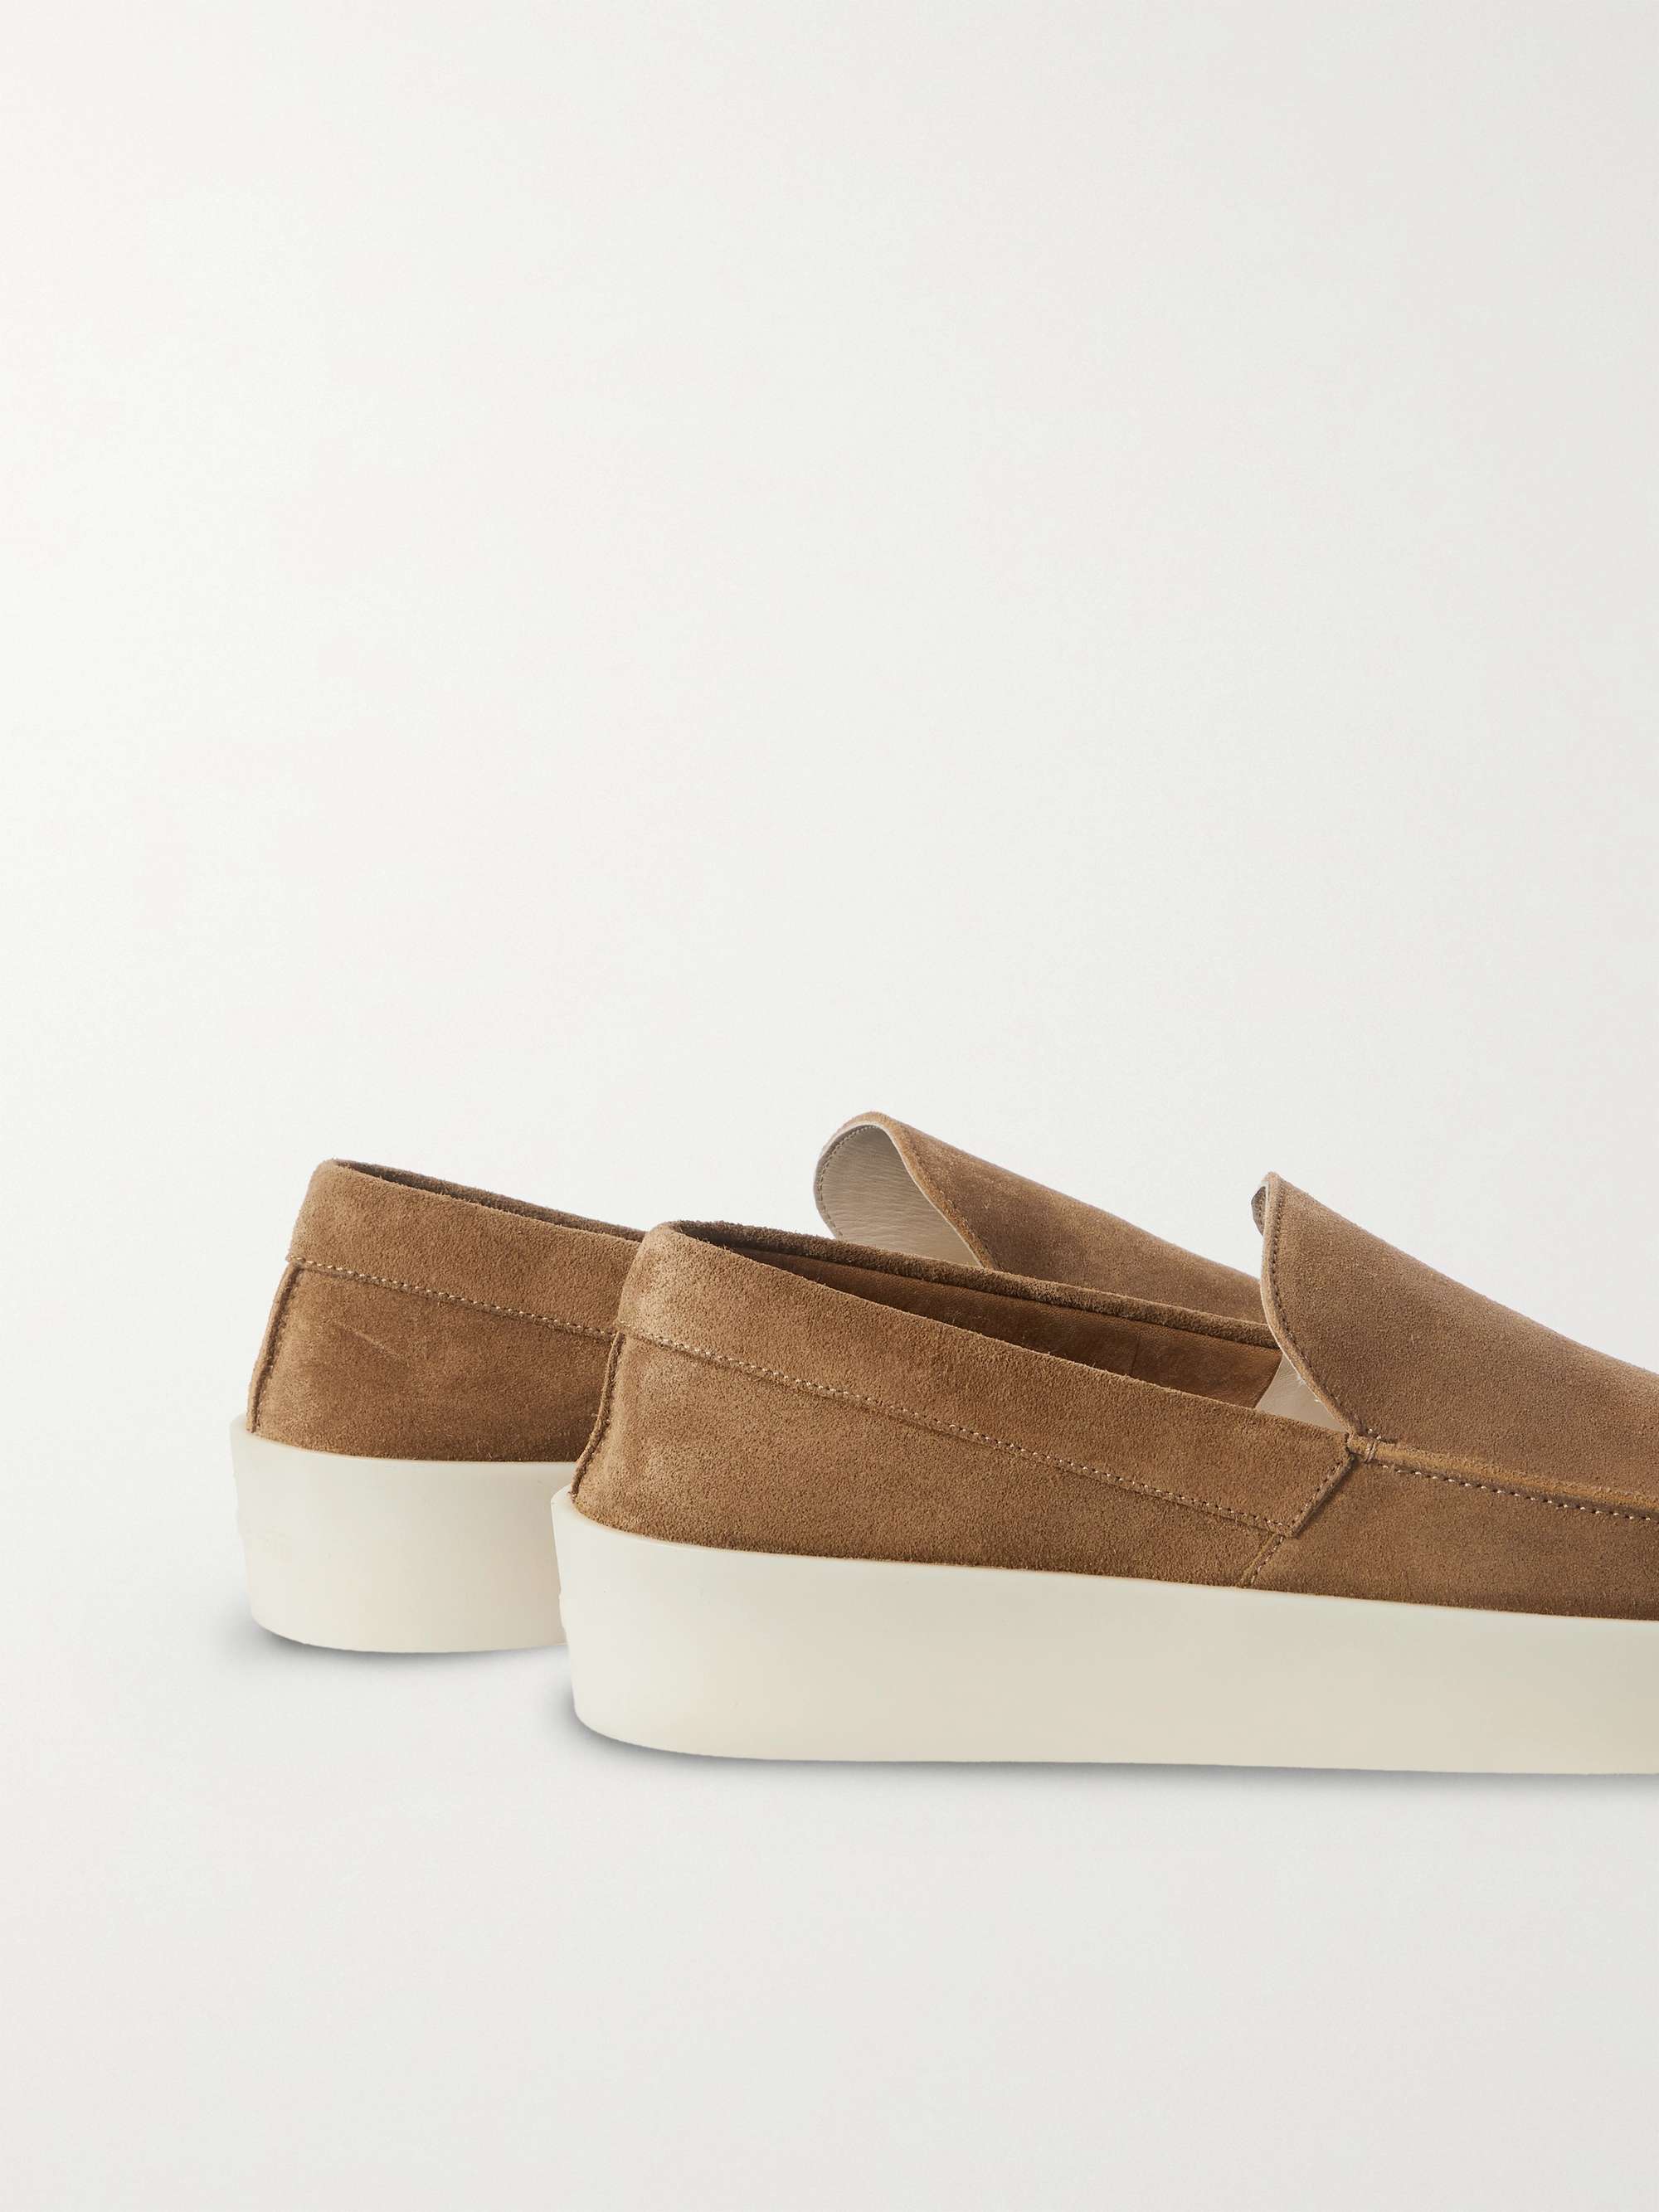 FEAR OF GOD Reverse Suede Loafers